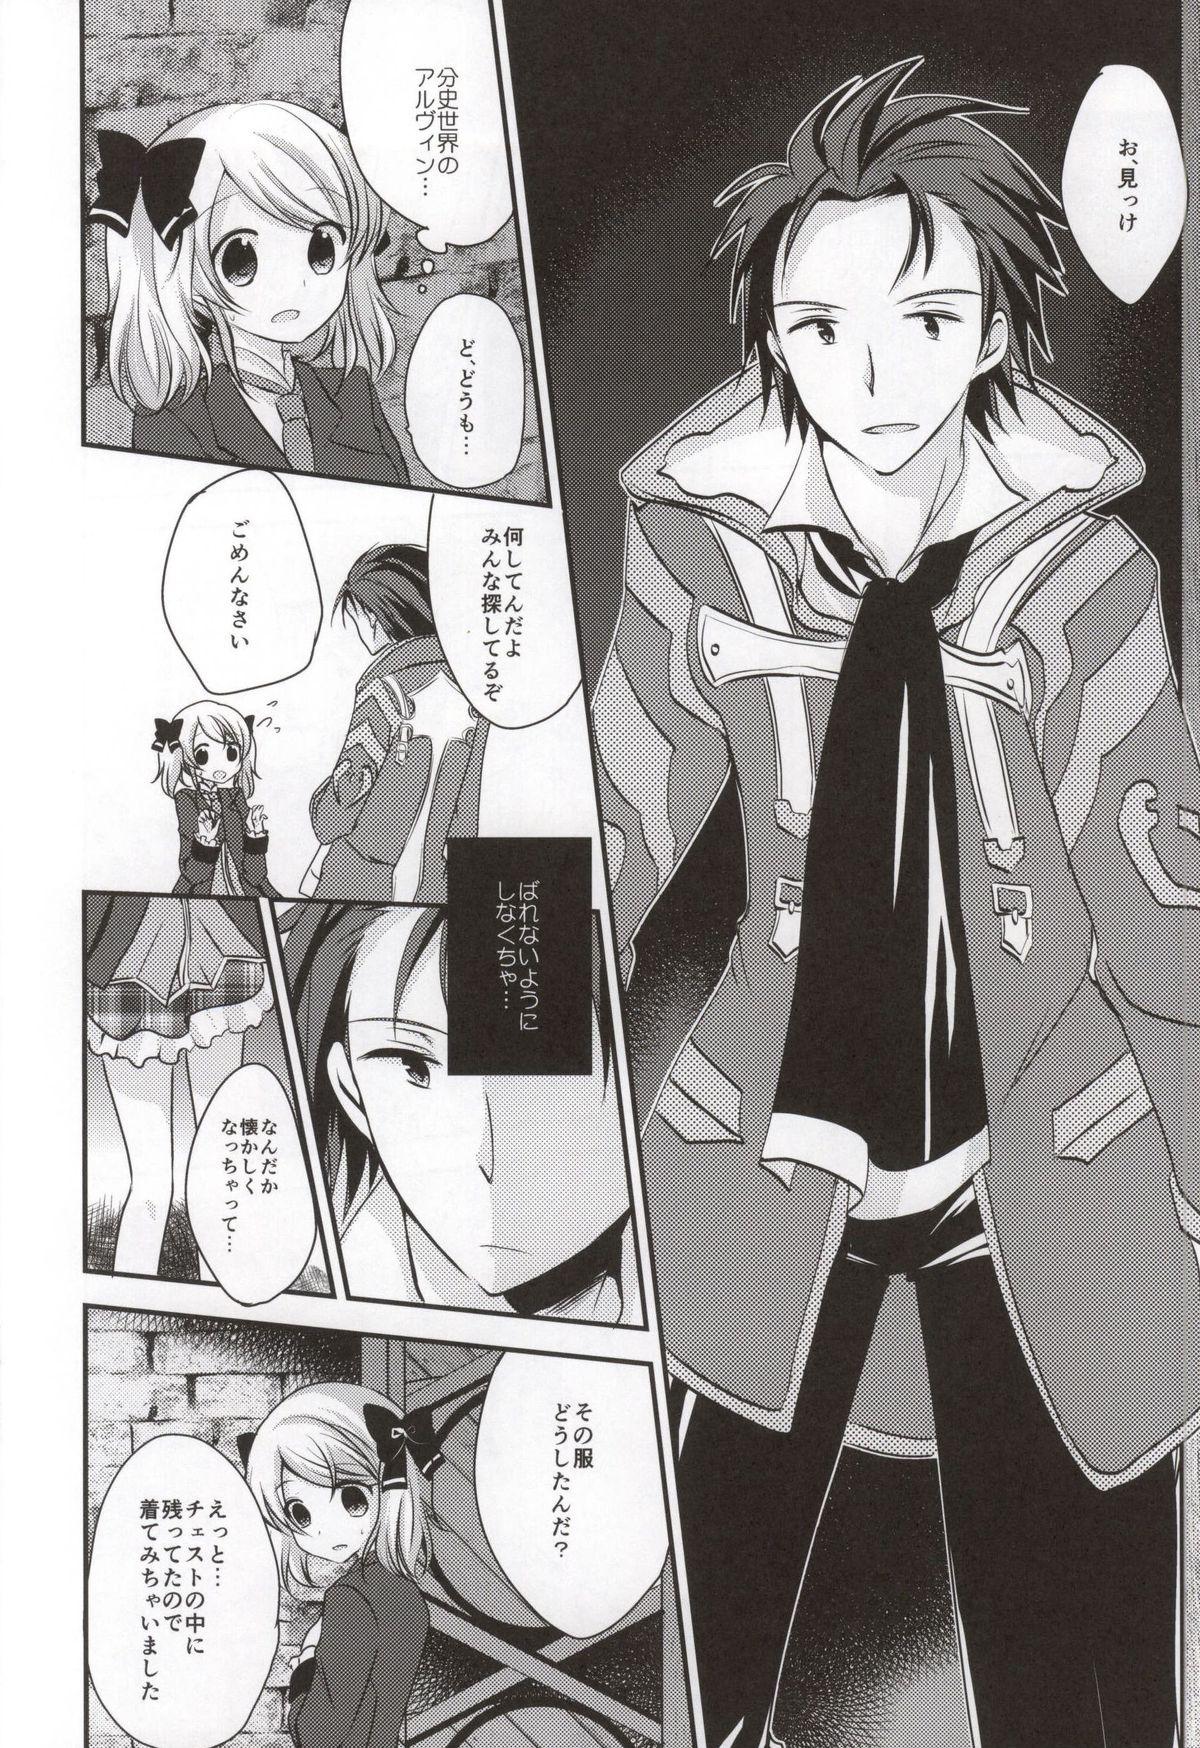 Petite Teen Gekijou Another - Tales of xillia Shaking - Page 6